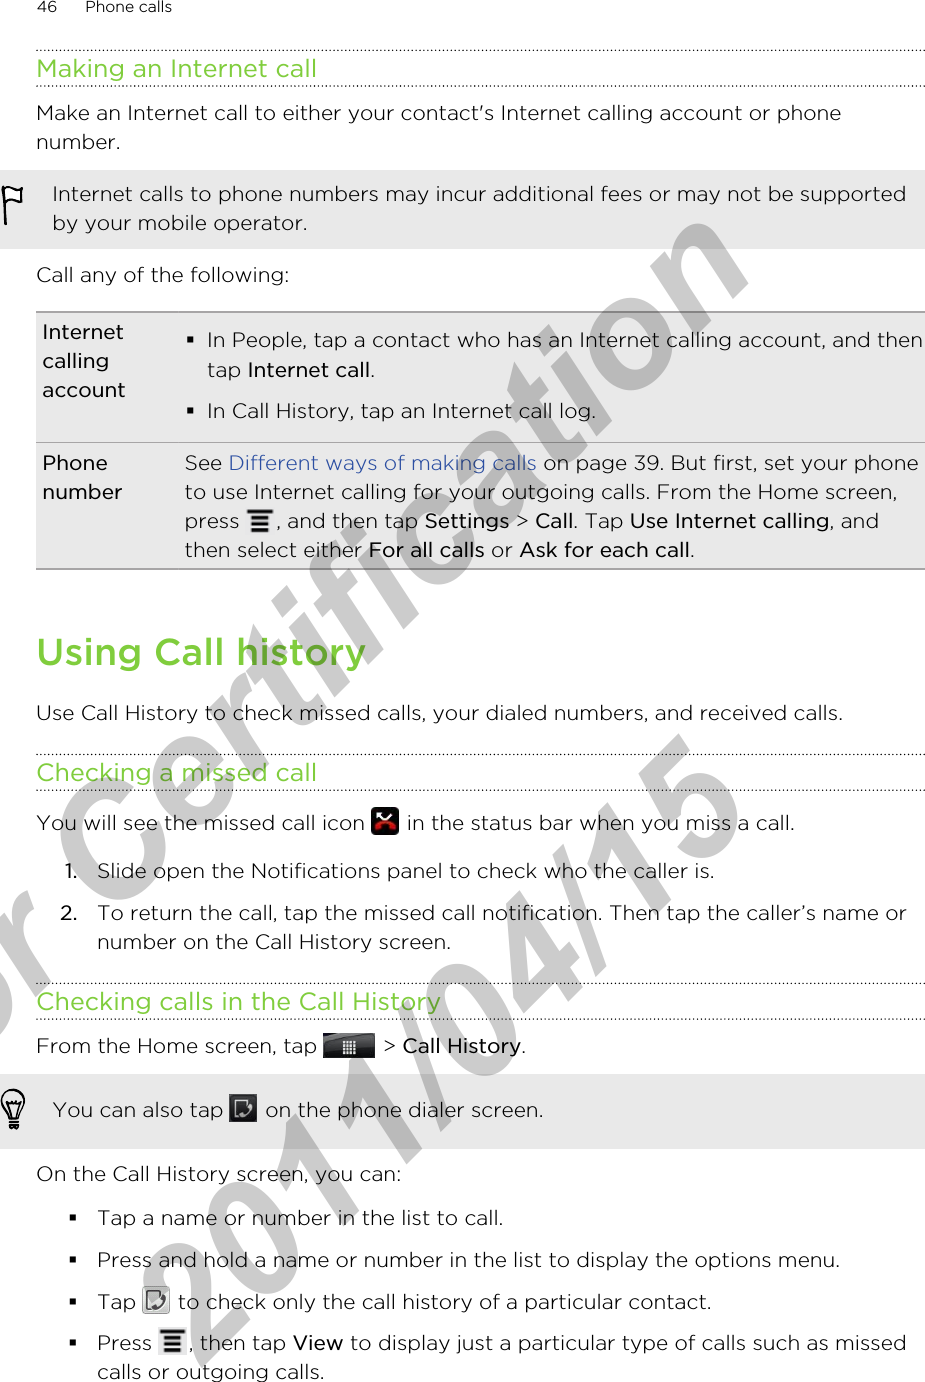 Making an Internet callMake an Internet call to either your contact&apos;s Internet calling account or phonenumber.Internet calls to phone numbers may incur additional fees or may not be supportedby your mobile operator.Call any of the following:Internetcallingaccount§In People, tap a contact who has an Internet calling account, and thentap Internet call.§In Call History, tap an Internet call log.PhonenumberSee Different ways of making calls on page 39. But first, set your phoneto use Internet calling for your outgoing calls. From the Home screen,press  , and then tap Settings &gt; Call. Tap Use Internet calling, andthen select either For all calls or Ask for each call.Using Call historyUse Call History to check missed calls, your dialed numbers, and received calls.Checking a missed callYou will see the missed call icon   in the status bar when you miss a call.1. Slide open the Notifications panel to check who the caller is.2. To return the call, tap the missed call notification. Then tap the caller’s name ornumber on the Call History screen.Checking calls in the Call HistoryFrom the Home screen, tap   &gt; Call History. You can also tap   on the phone dialer screen.On the Call History screen, you can:§Tap a name or number in the list to call.§Press and hold a name or number in the list to display the options menu.§Tap   to check only the call history of a particular contact.§Press  , then tap View to display just a particular type of calls such as missedcalls or outgoing calls.46 Phone callsfor Certification  2011/04/15